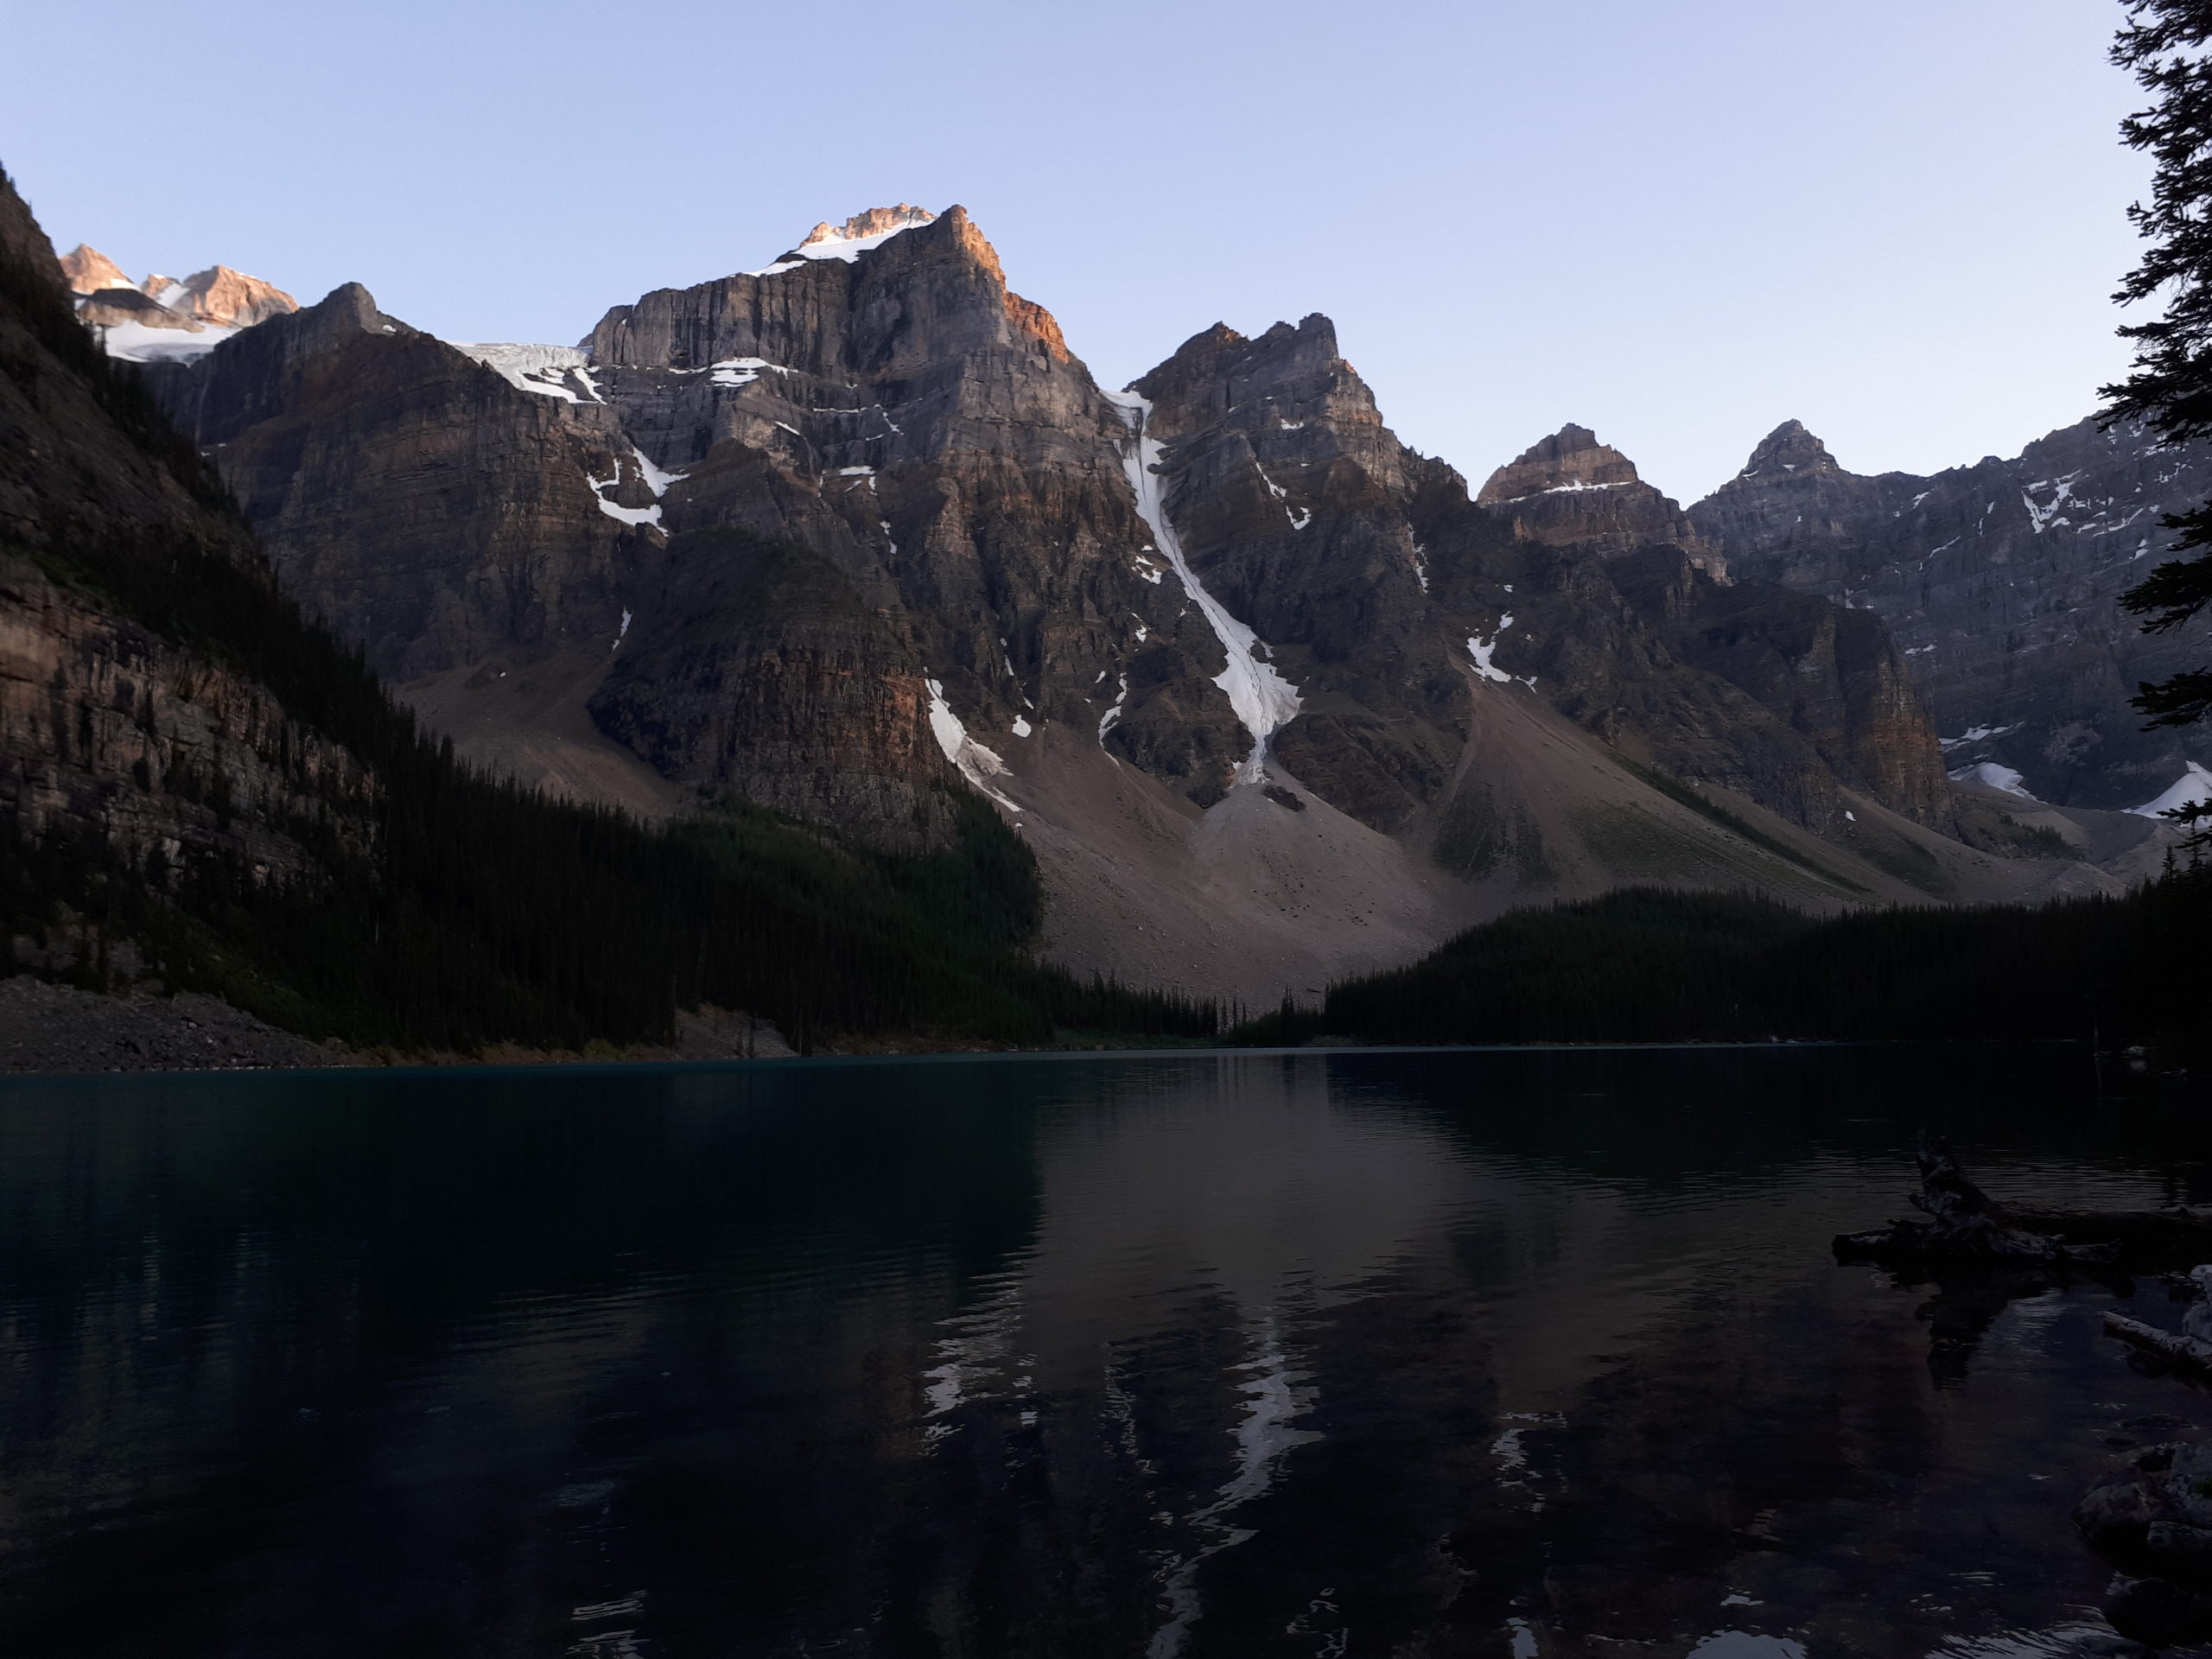 View of Moraine Lake at sunset.